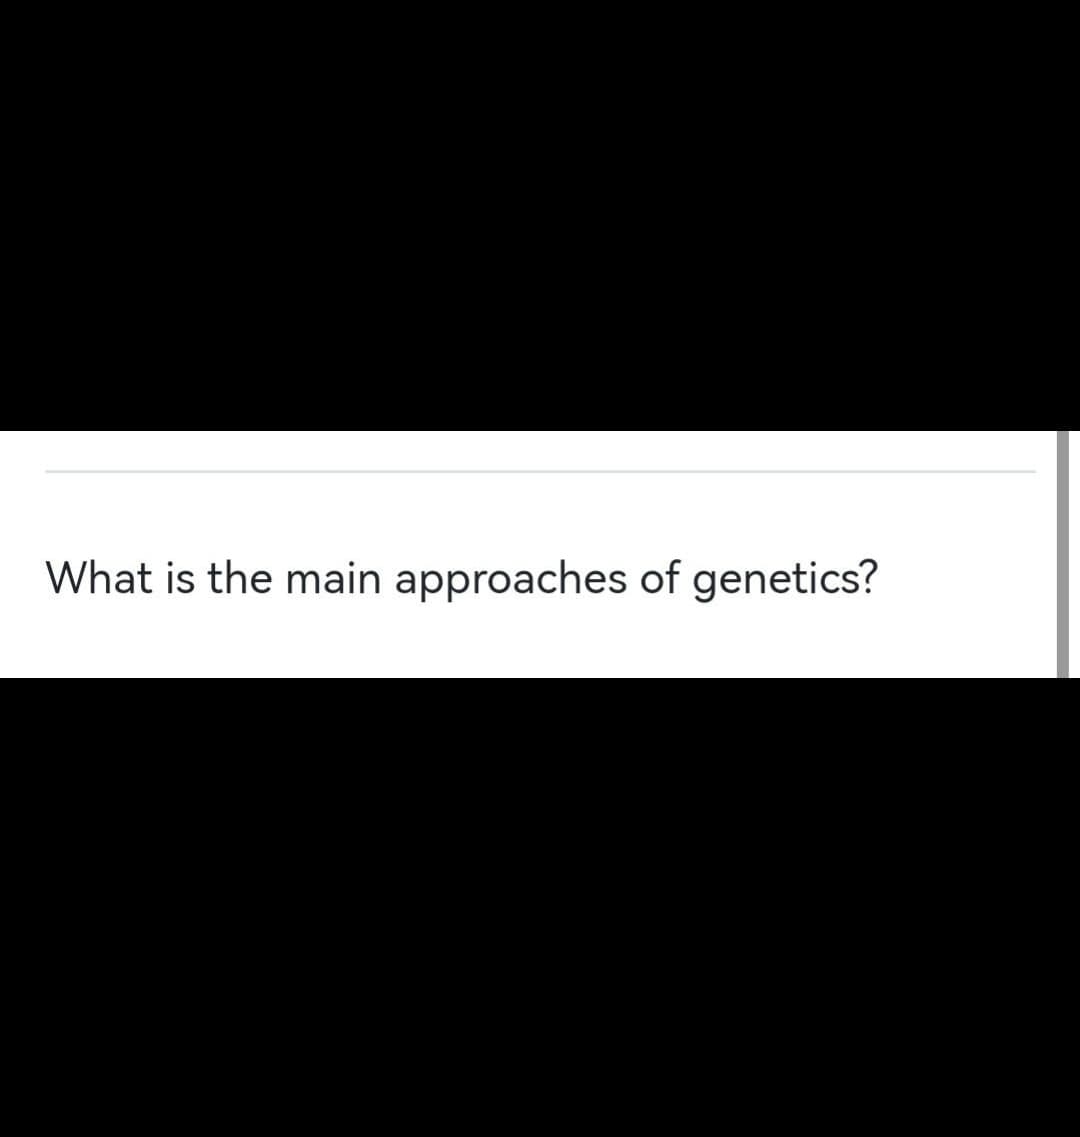 What is the main approaches of genetics?
